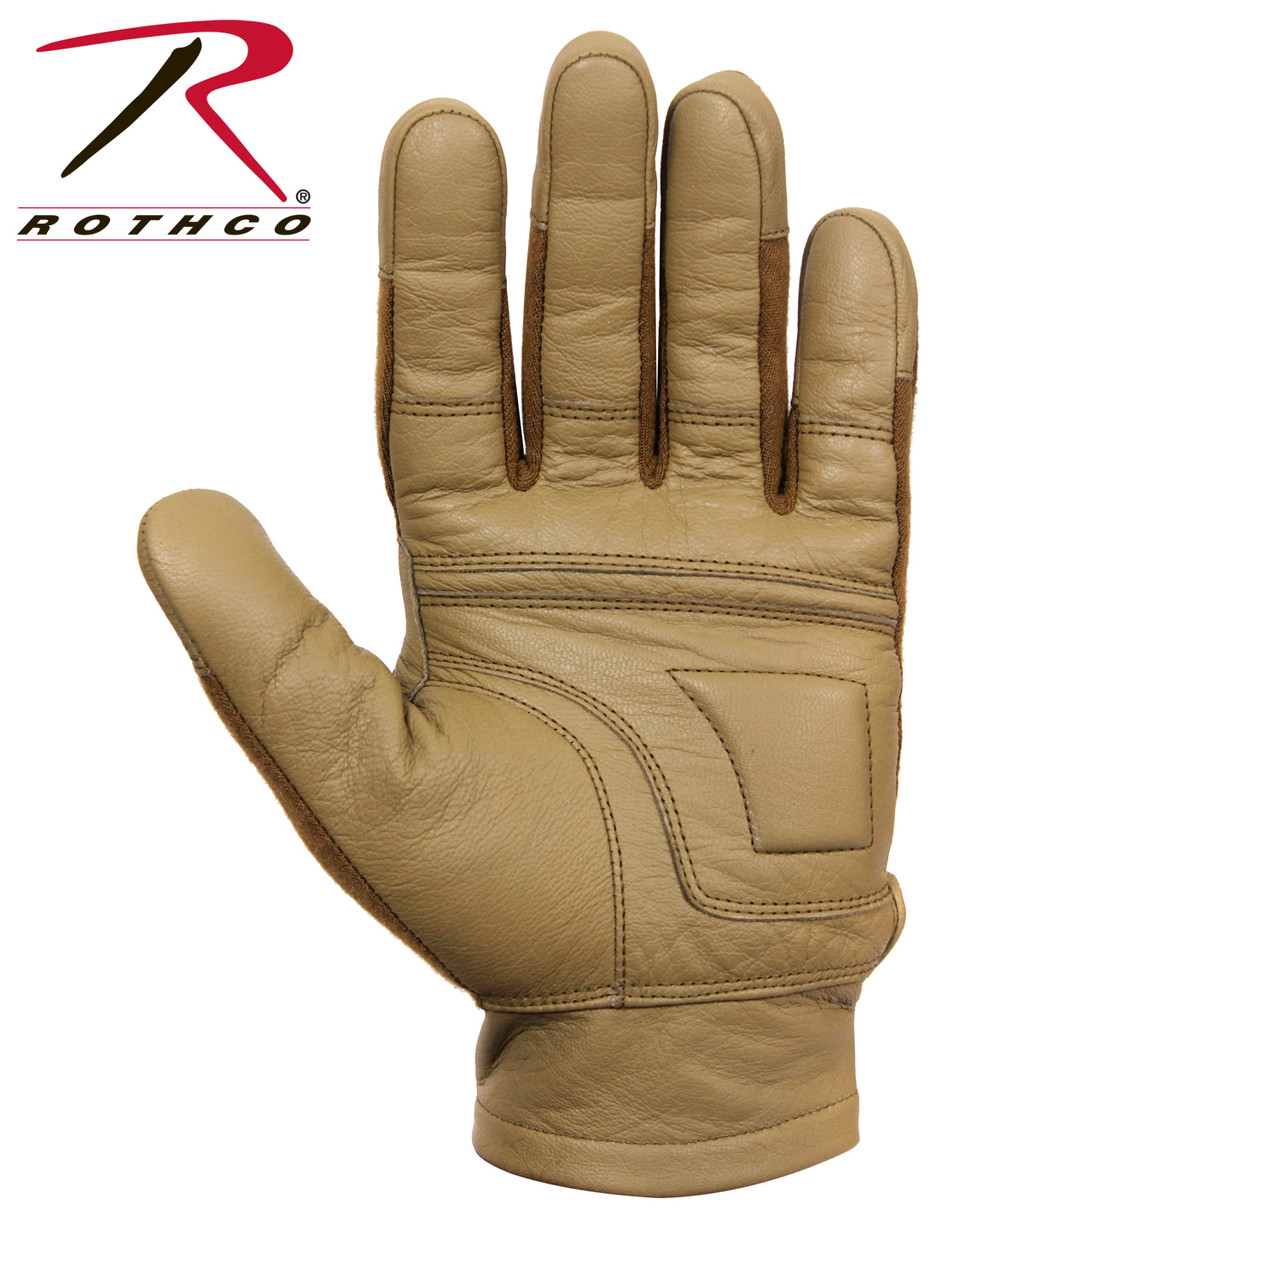 Rothco Fingerless Cut and Fire Resistant Carbon Hard Knuckle Gloves - –  Legendary USA